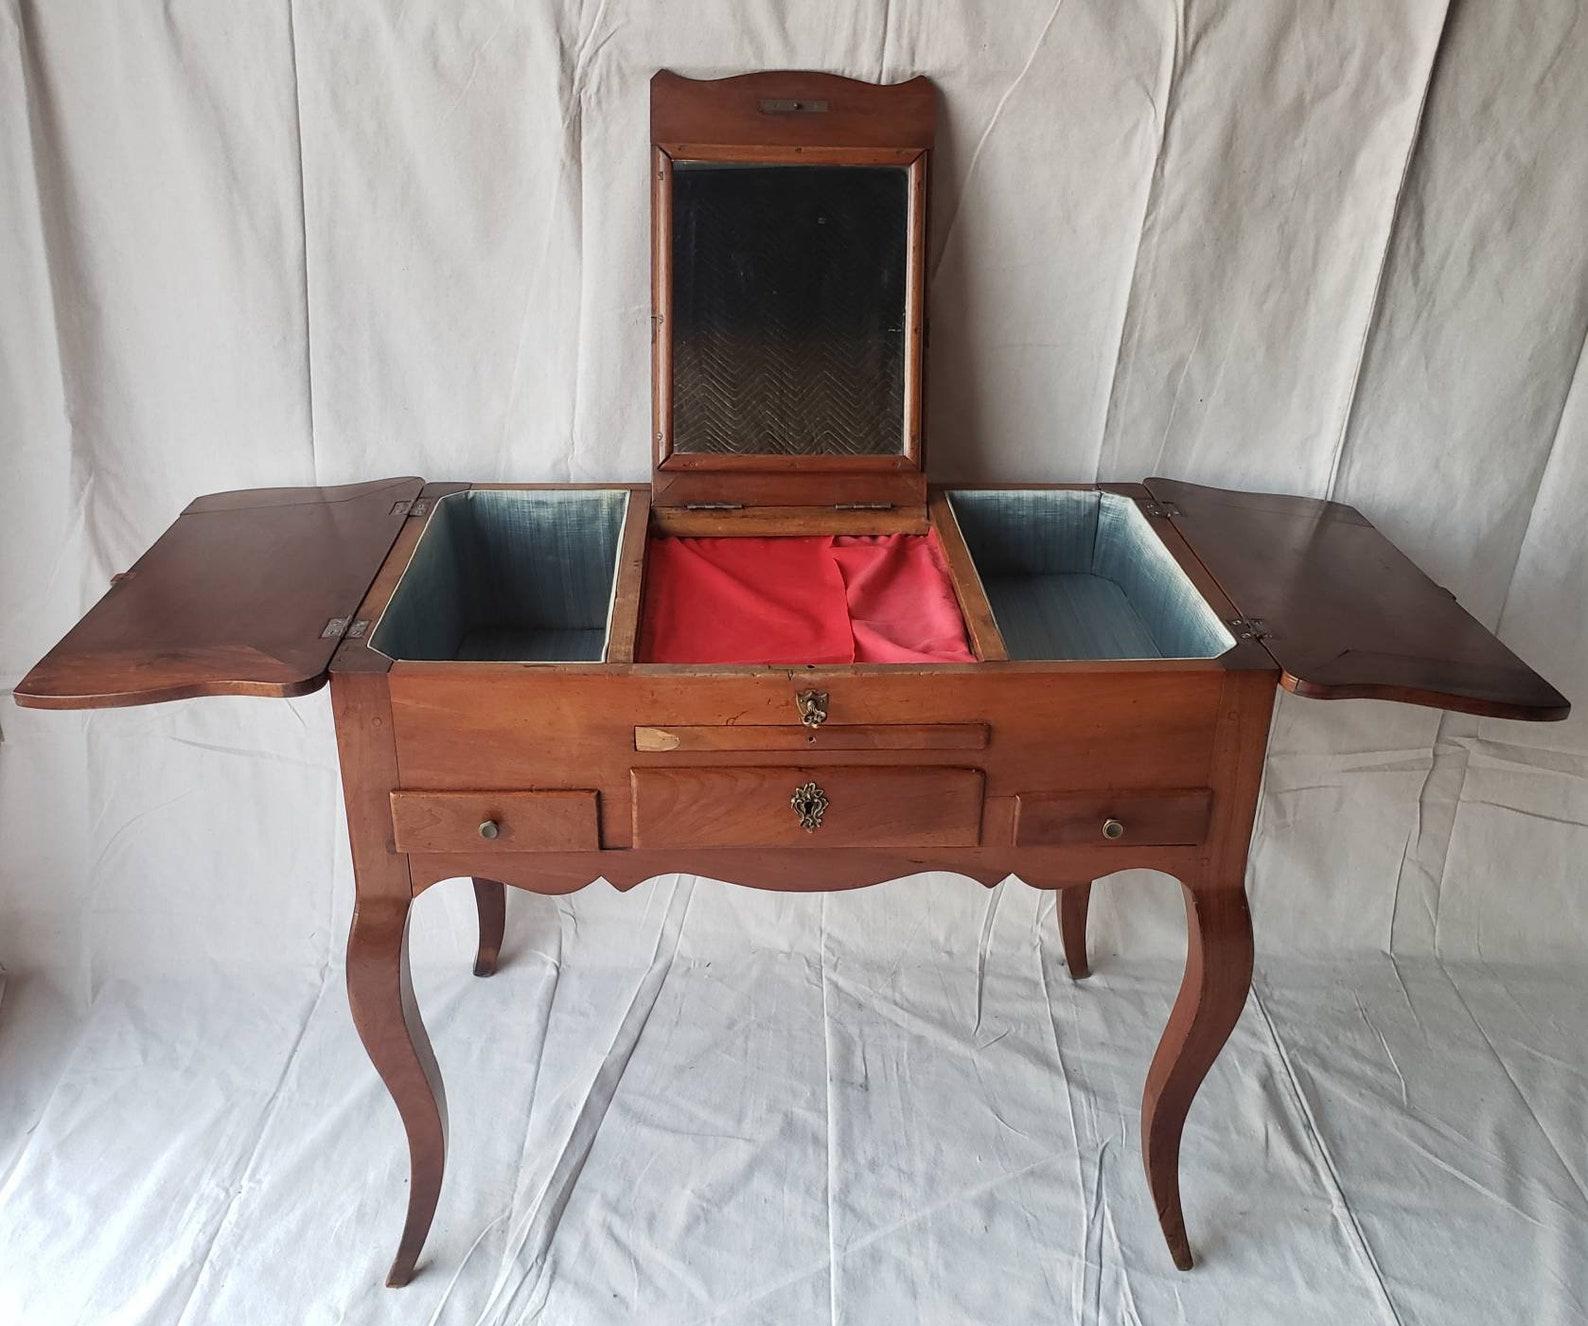 A rare Provincial Louis XV period fruitwood coiffeuse poudreuse Table de toilette (lady's dressing table) with beautiful patina. Handcrafted in France during the third quarter of the 18th century, having a shaped top with two side leaves on hinges